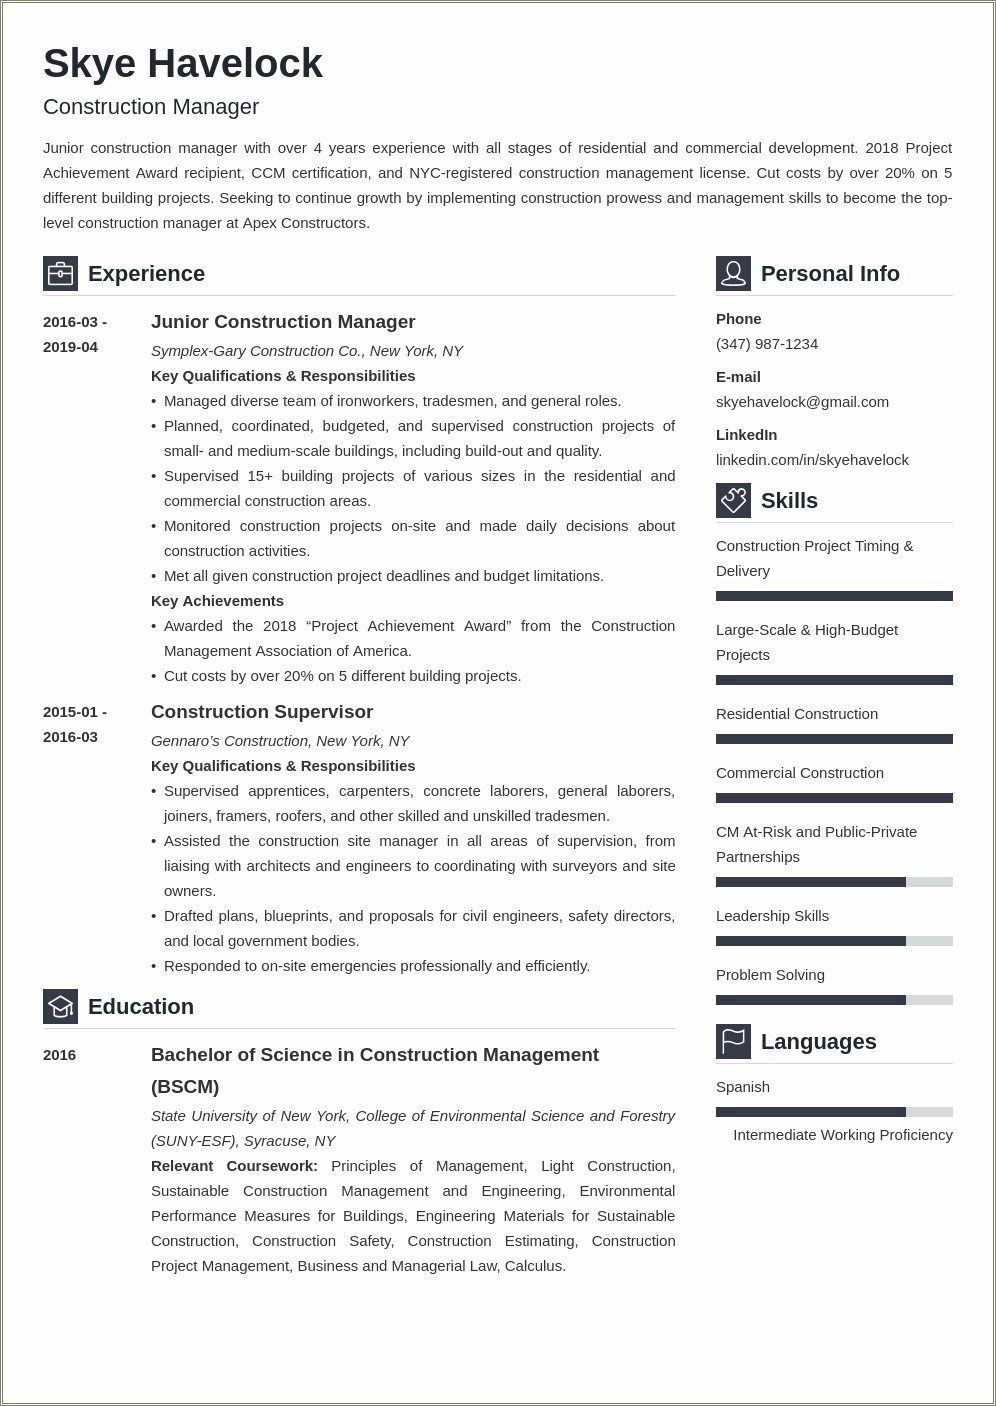 Resume Objective Samples Construction Project Manager